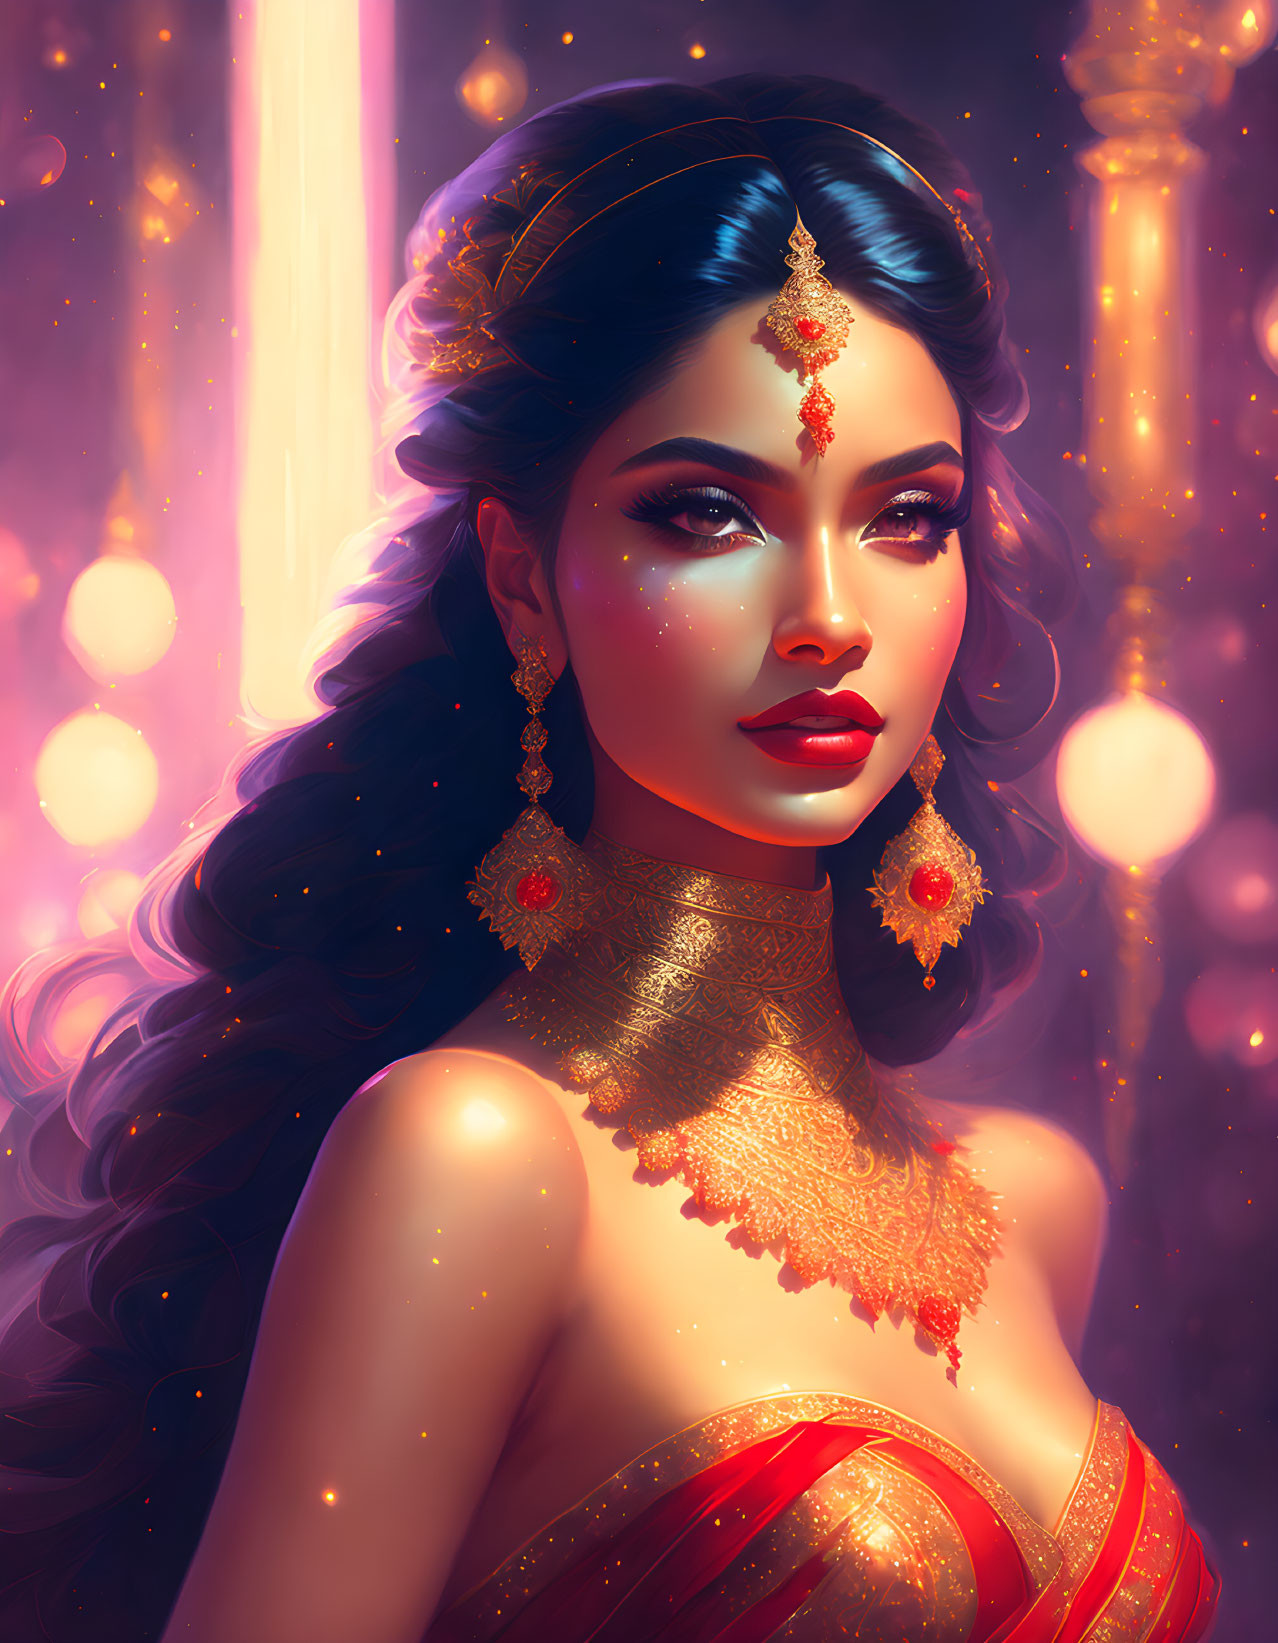 Traditional woman illustration with gold jewelry and lanterns in starry sky